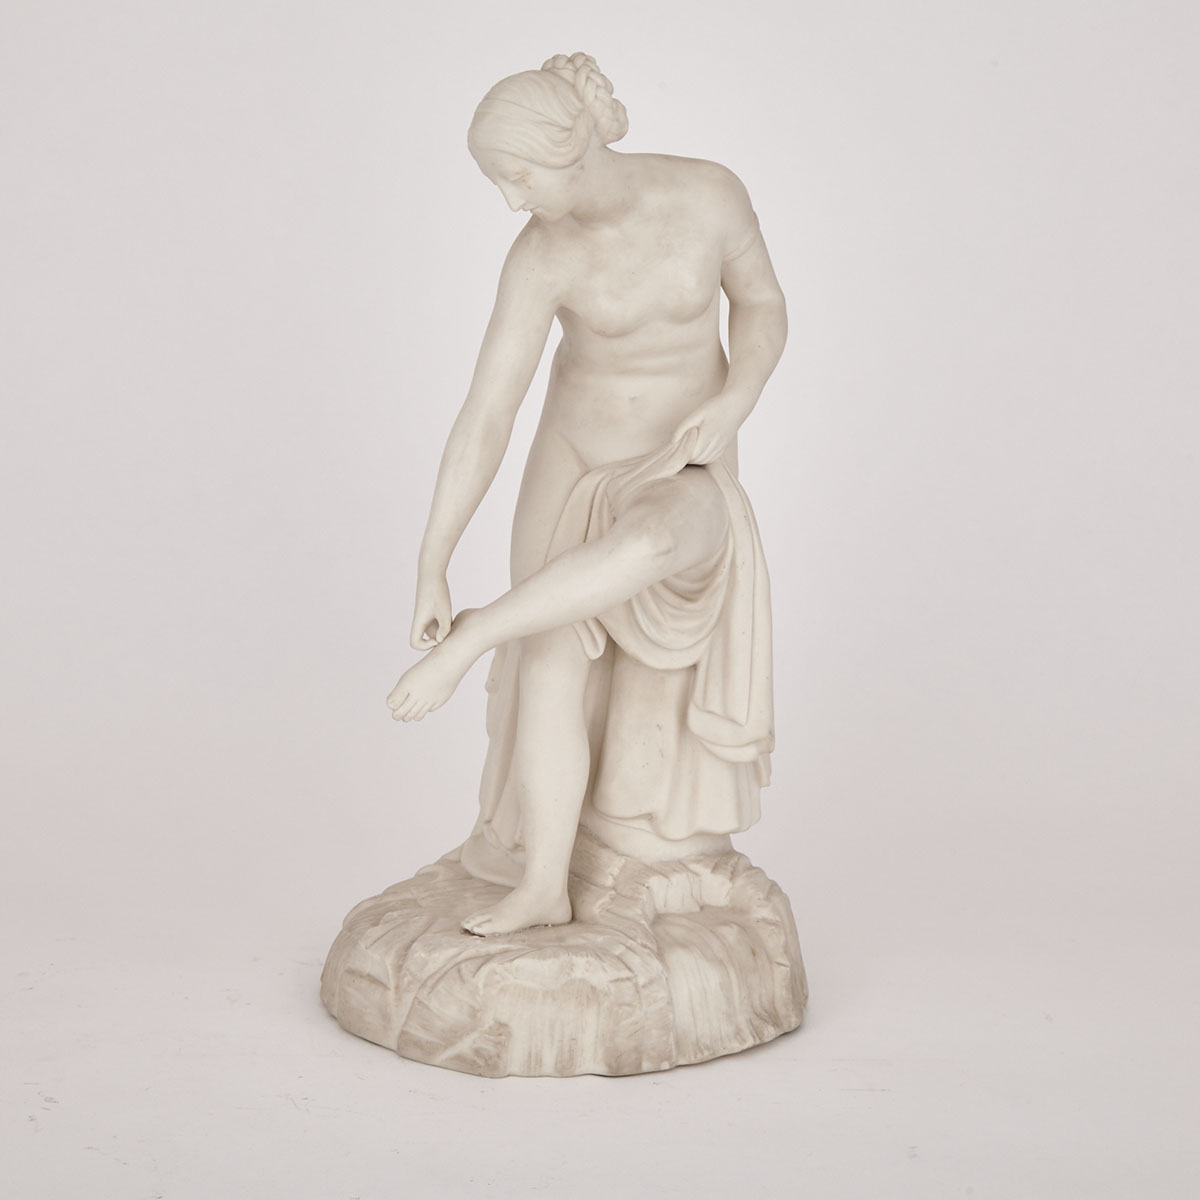 English Parian Figure of a Bather, c.1875